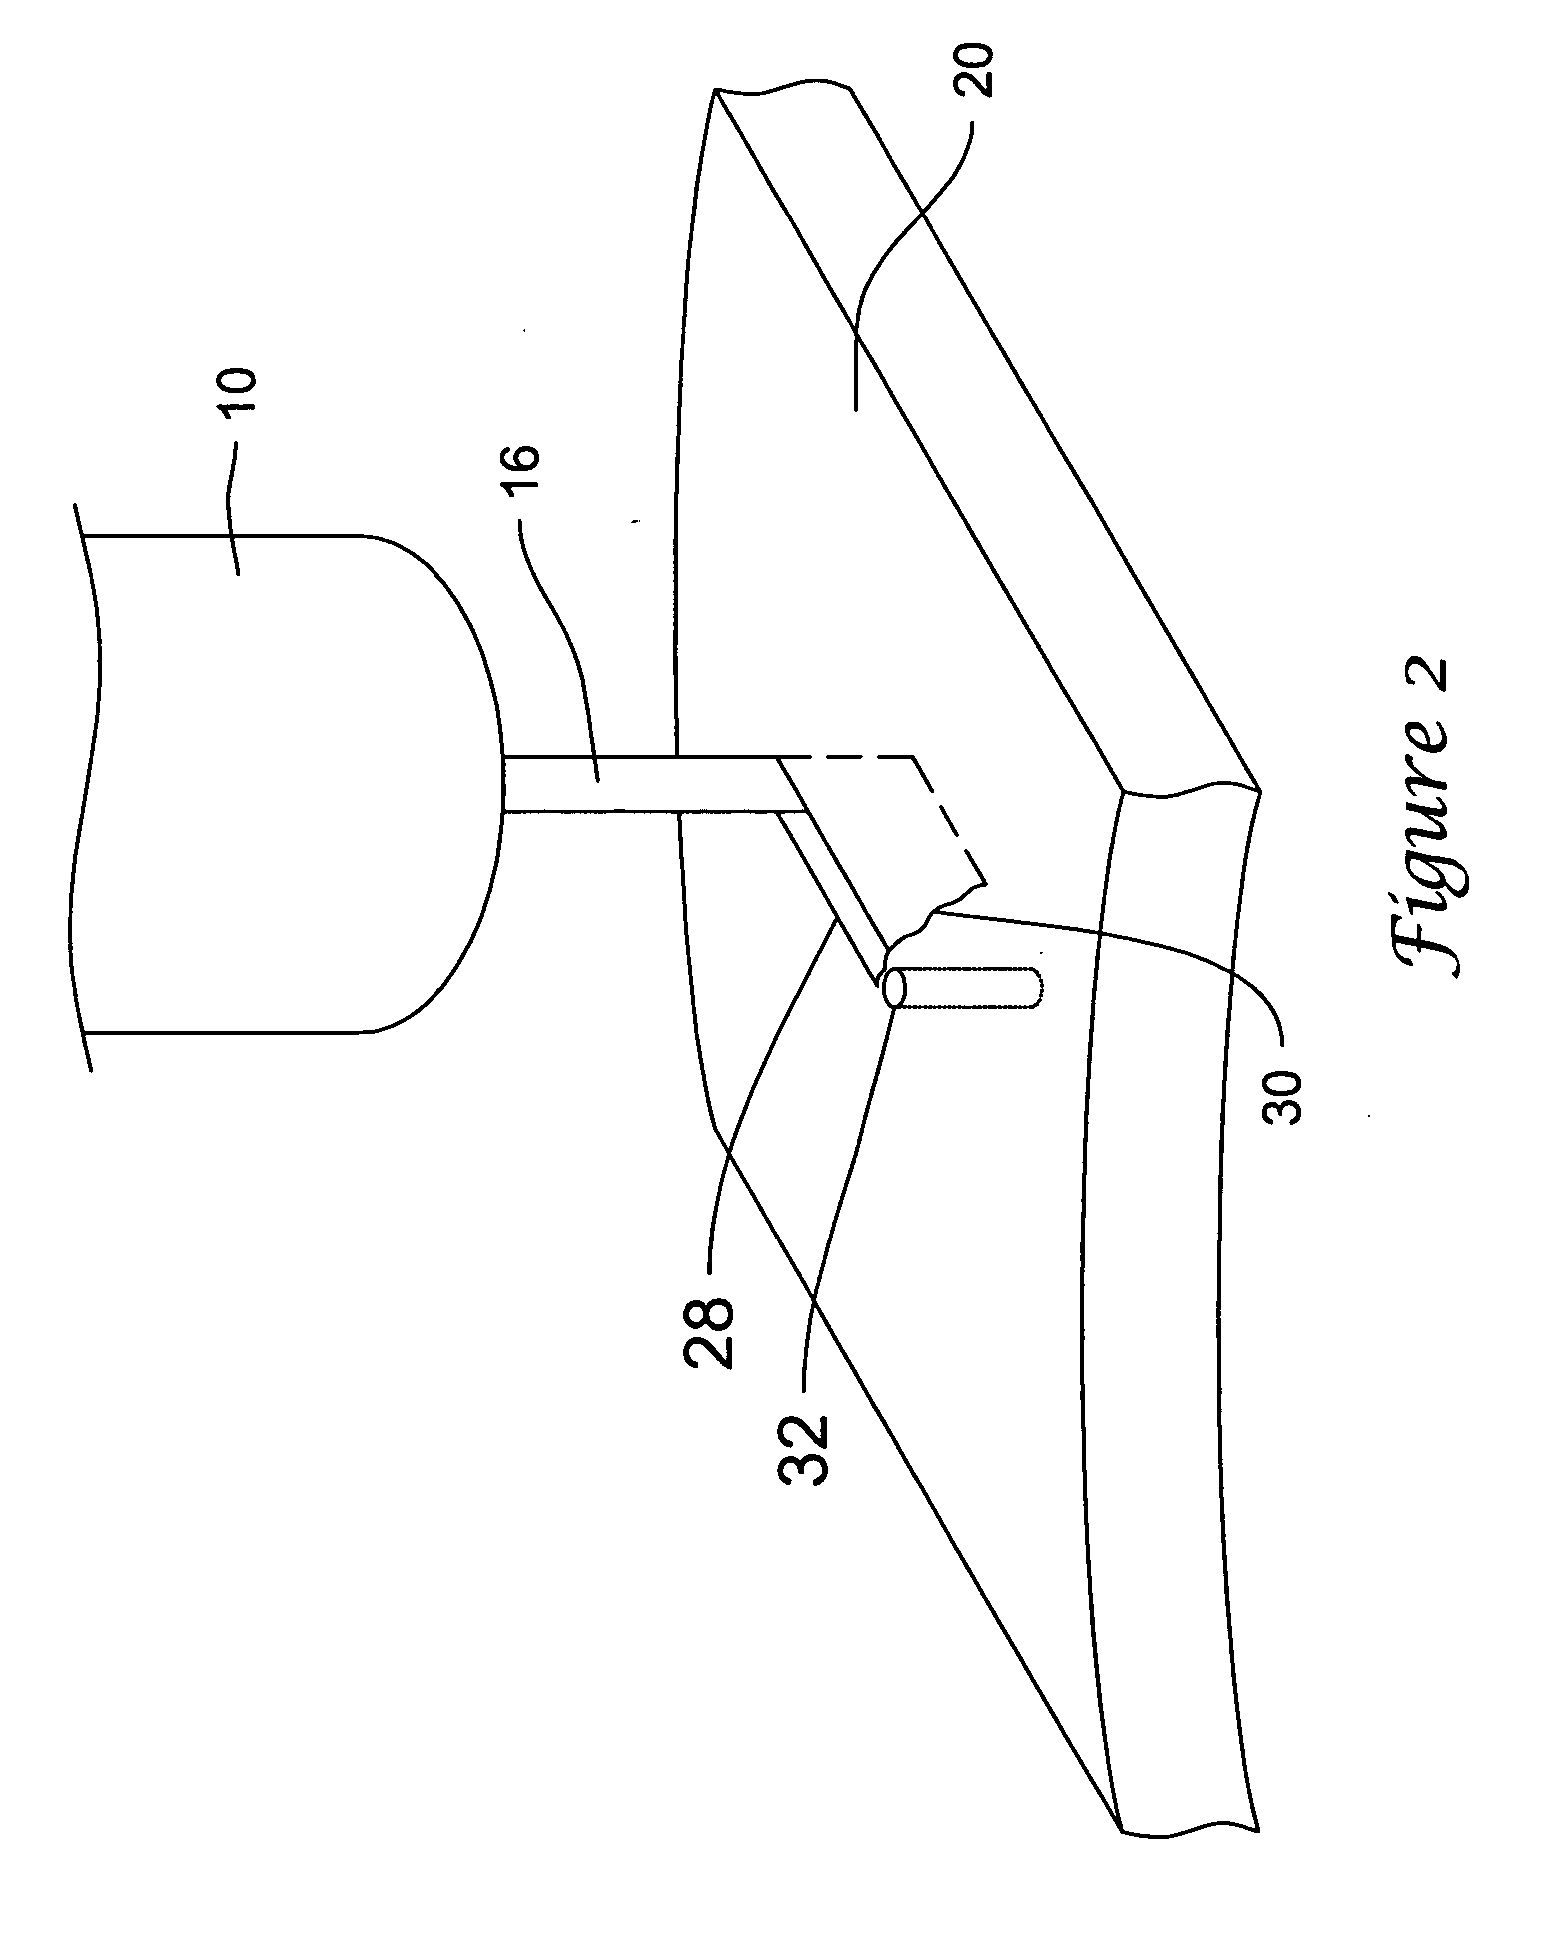 Method of cutting material with hybrid liquid-jet/laser system